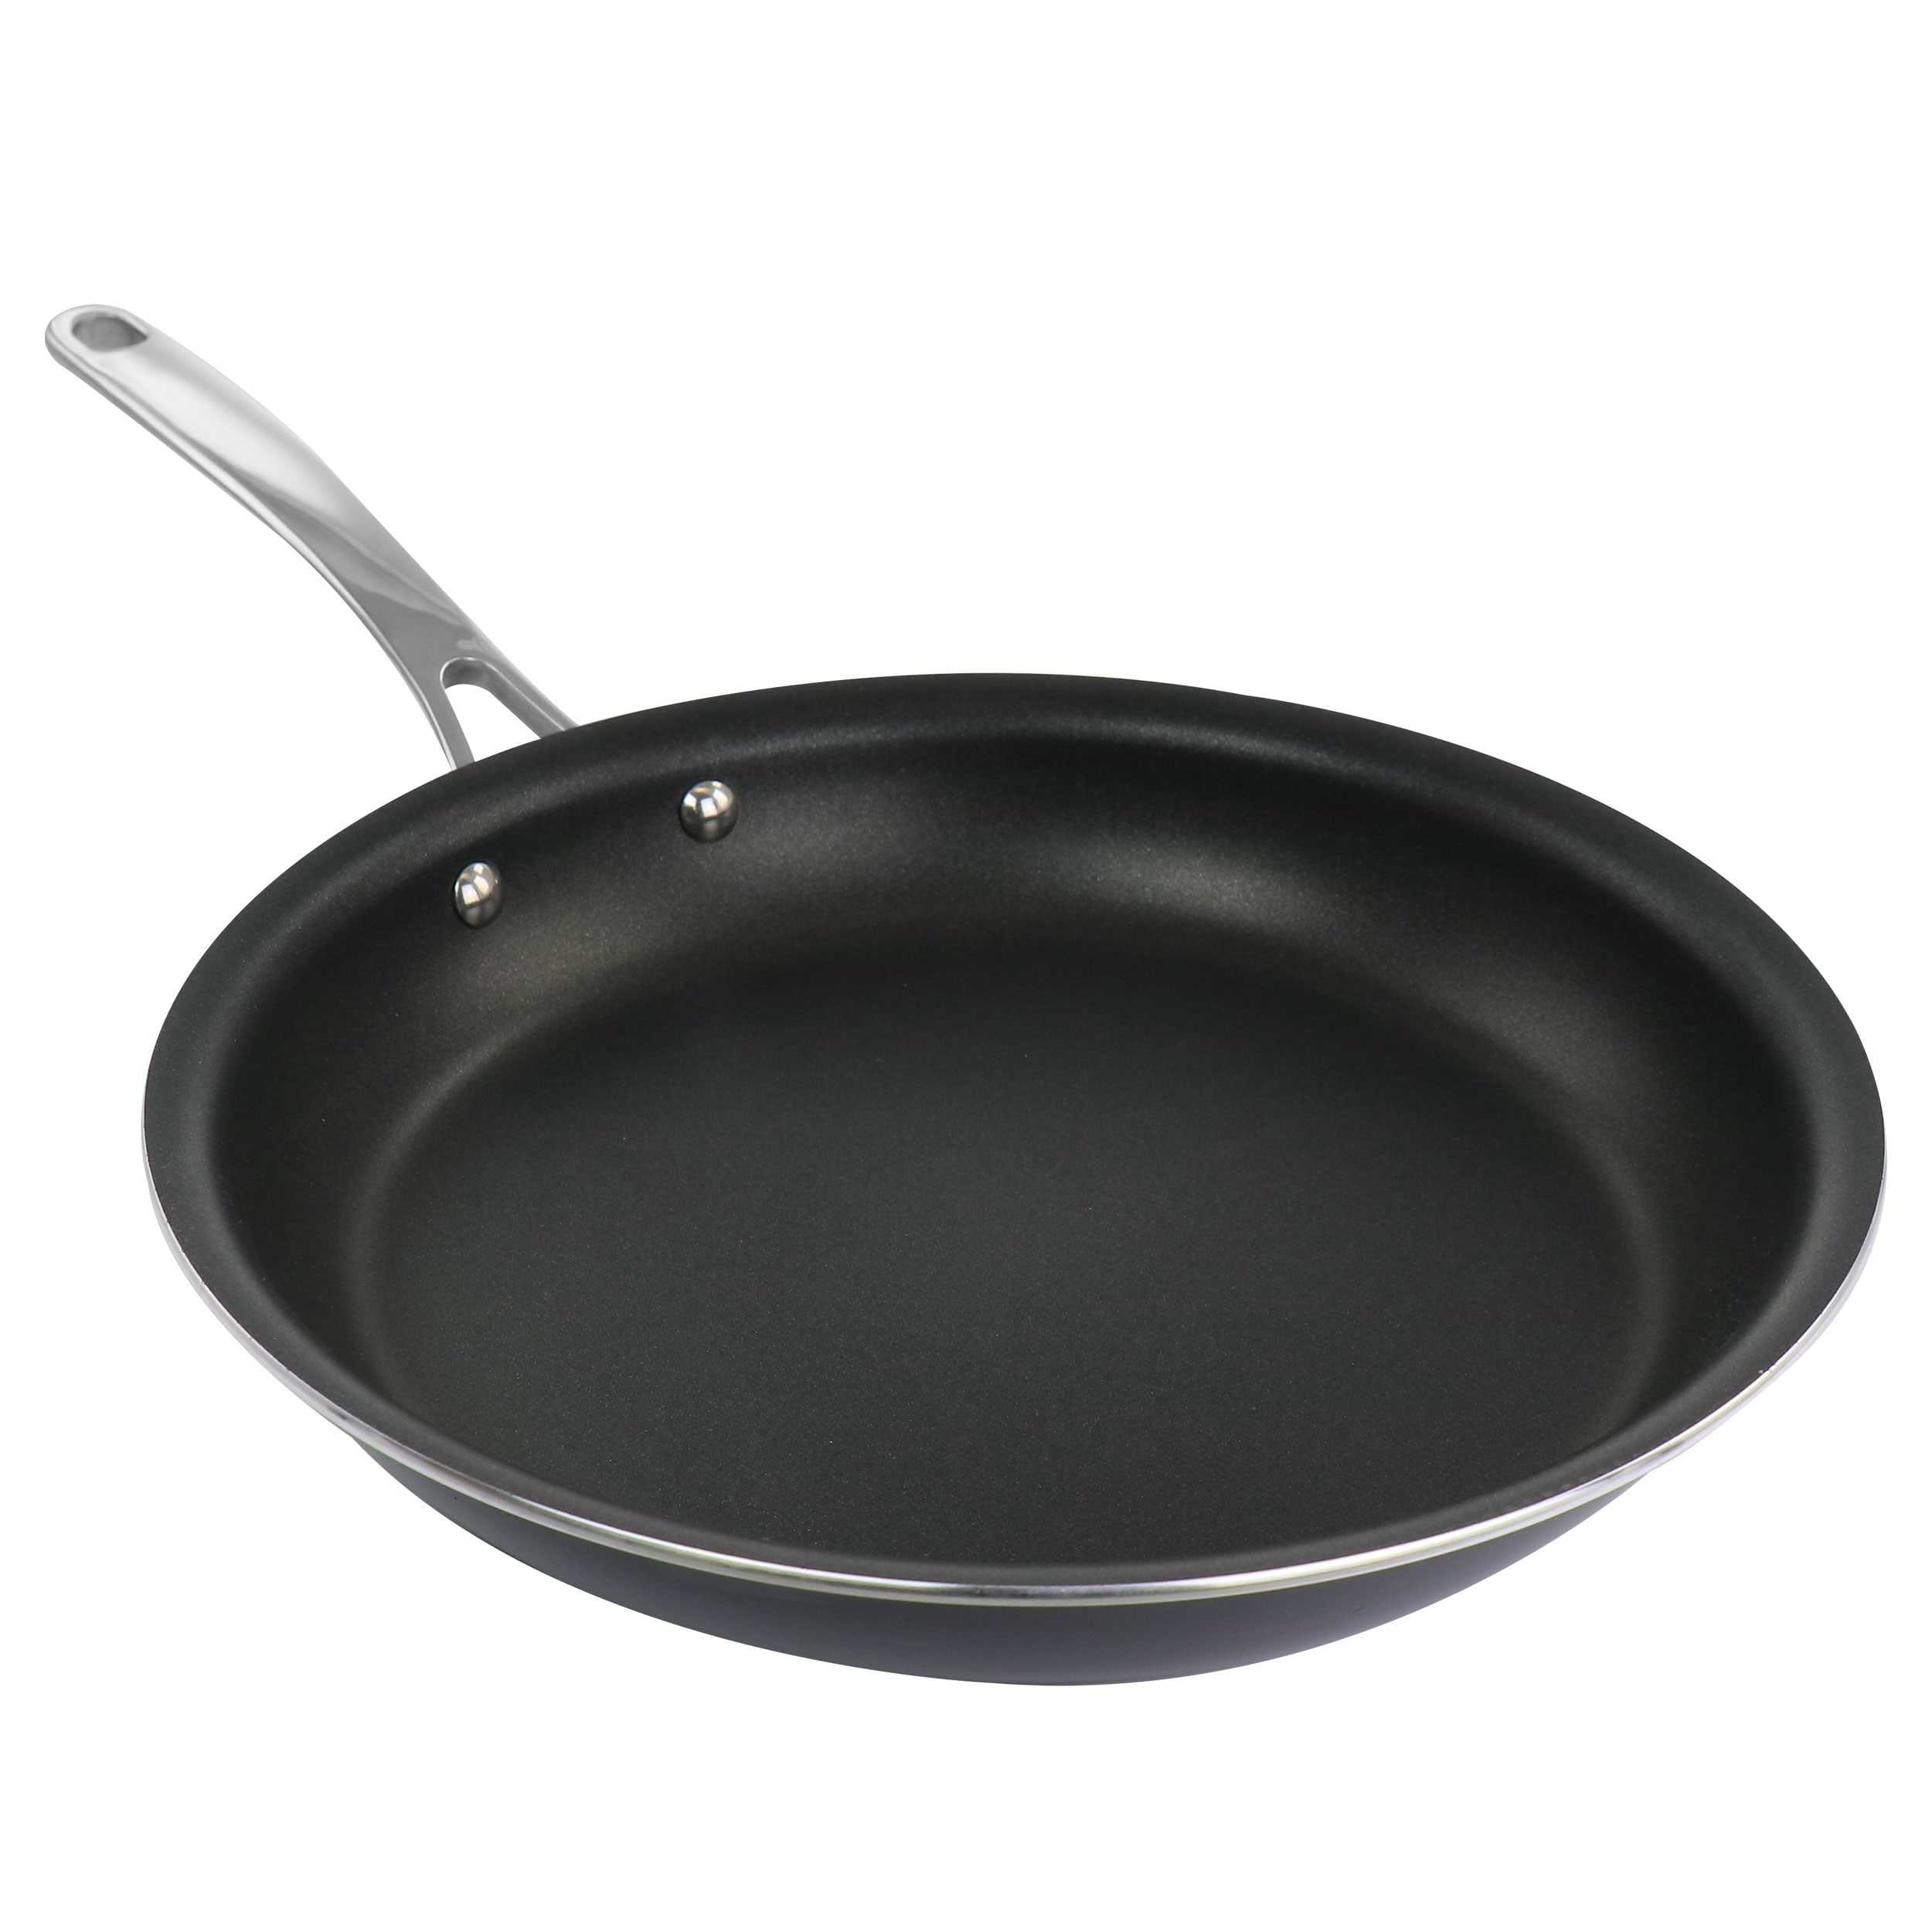 Hammered 12 inch, Non-Stick Frying Pan, Ceramic Cookware, Skillet, Premium